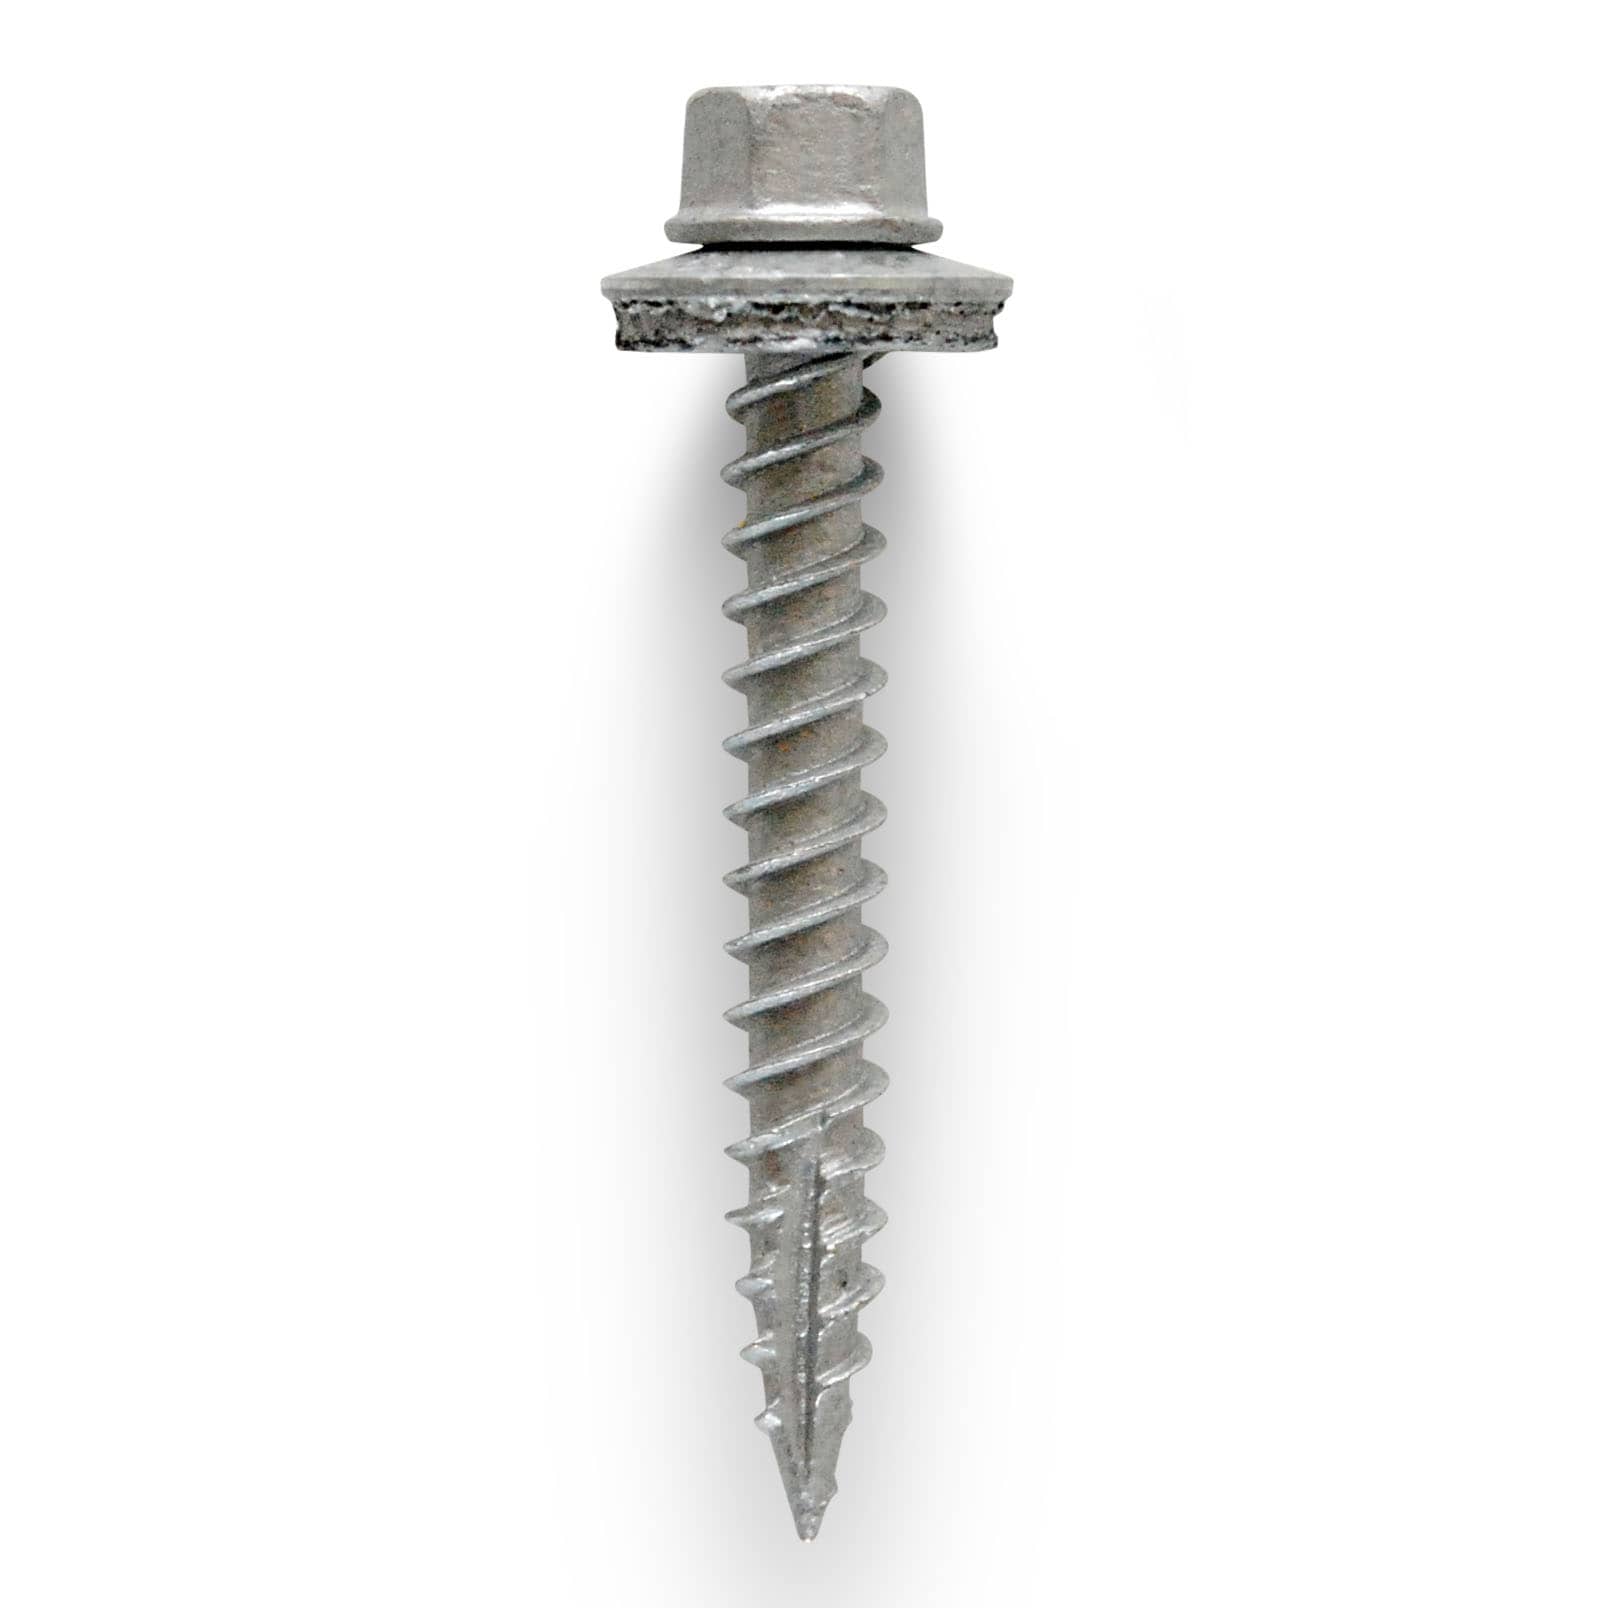 200 x WoodScrews £6.50 4 x 50mm Steel,Hardened and Zinc Plated Free p&p 2''X8 